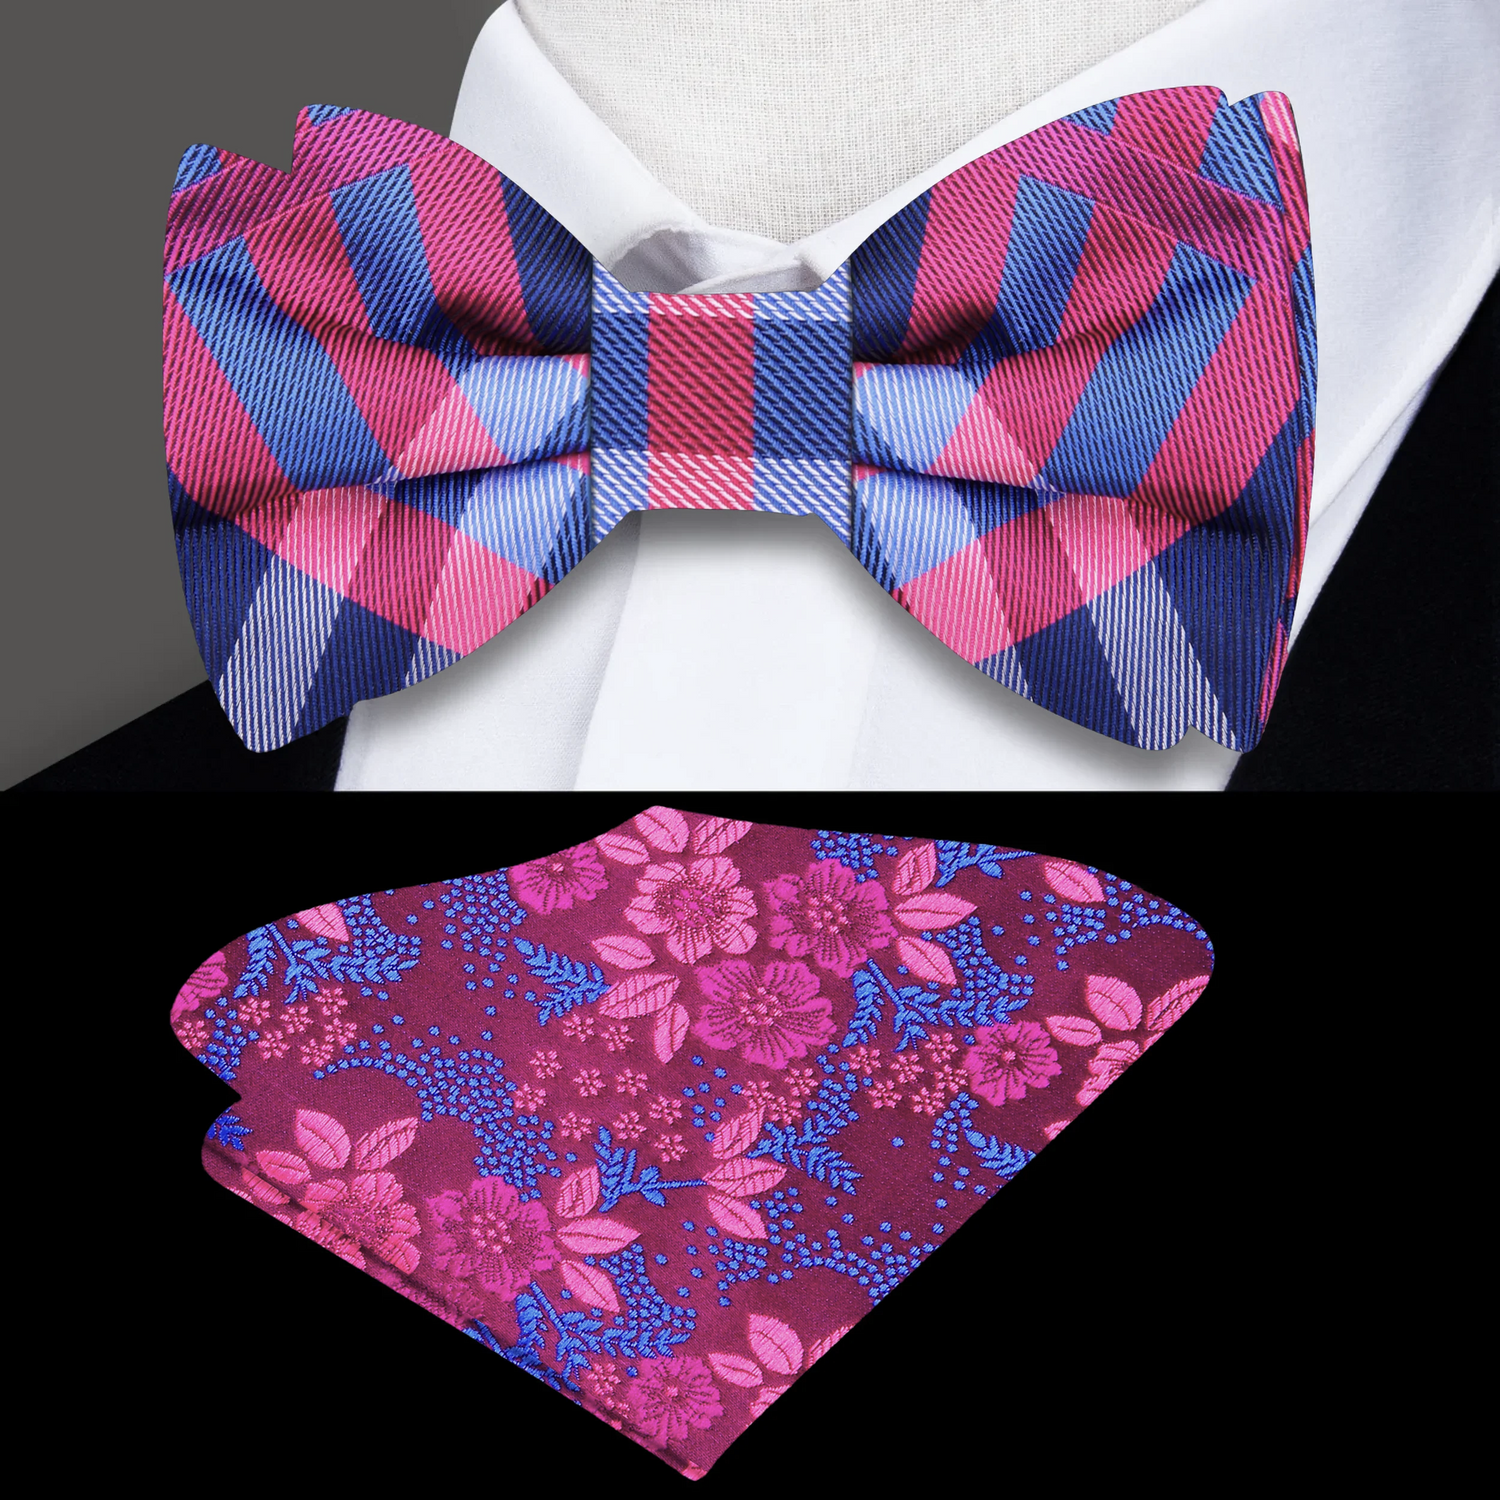 A Pink, Blue Plaid Pattern Silk Self Tie Bow Tie and Accenting Floral Square